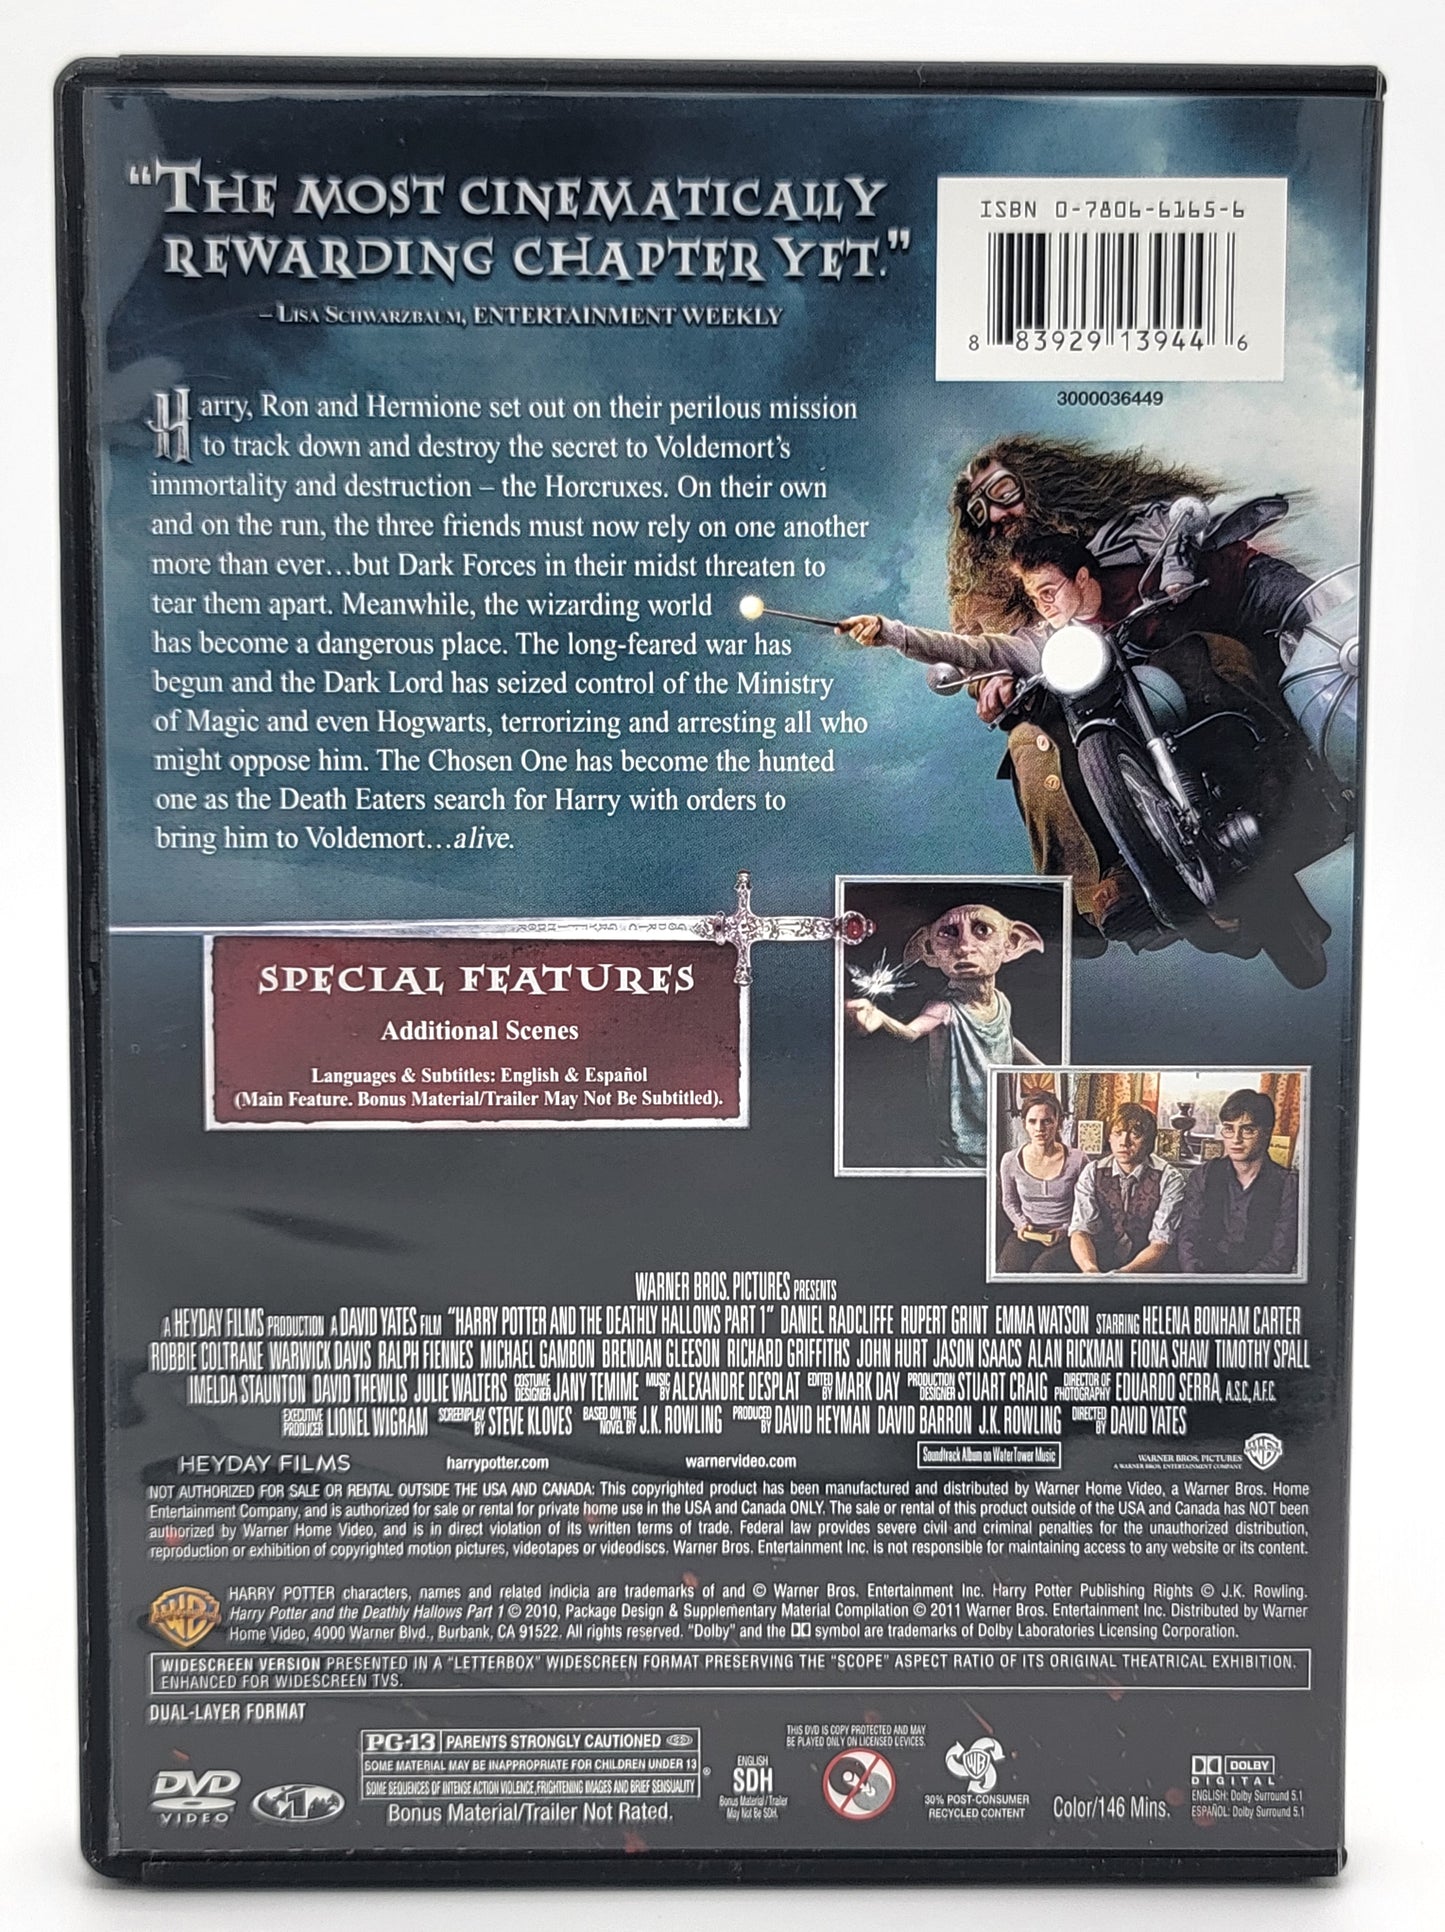 Harry Potter and The Deathly Hallows Part 1 | DVD | Widescreen